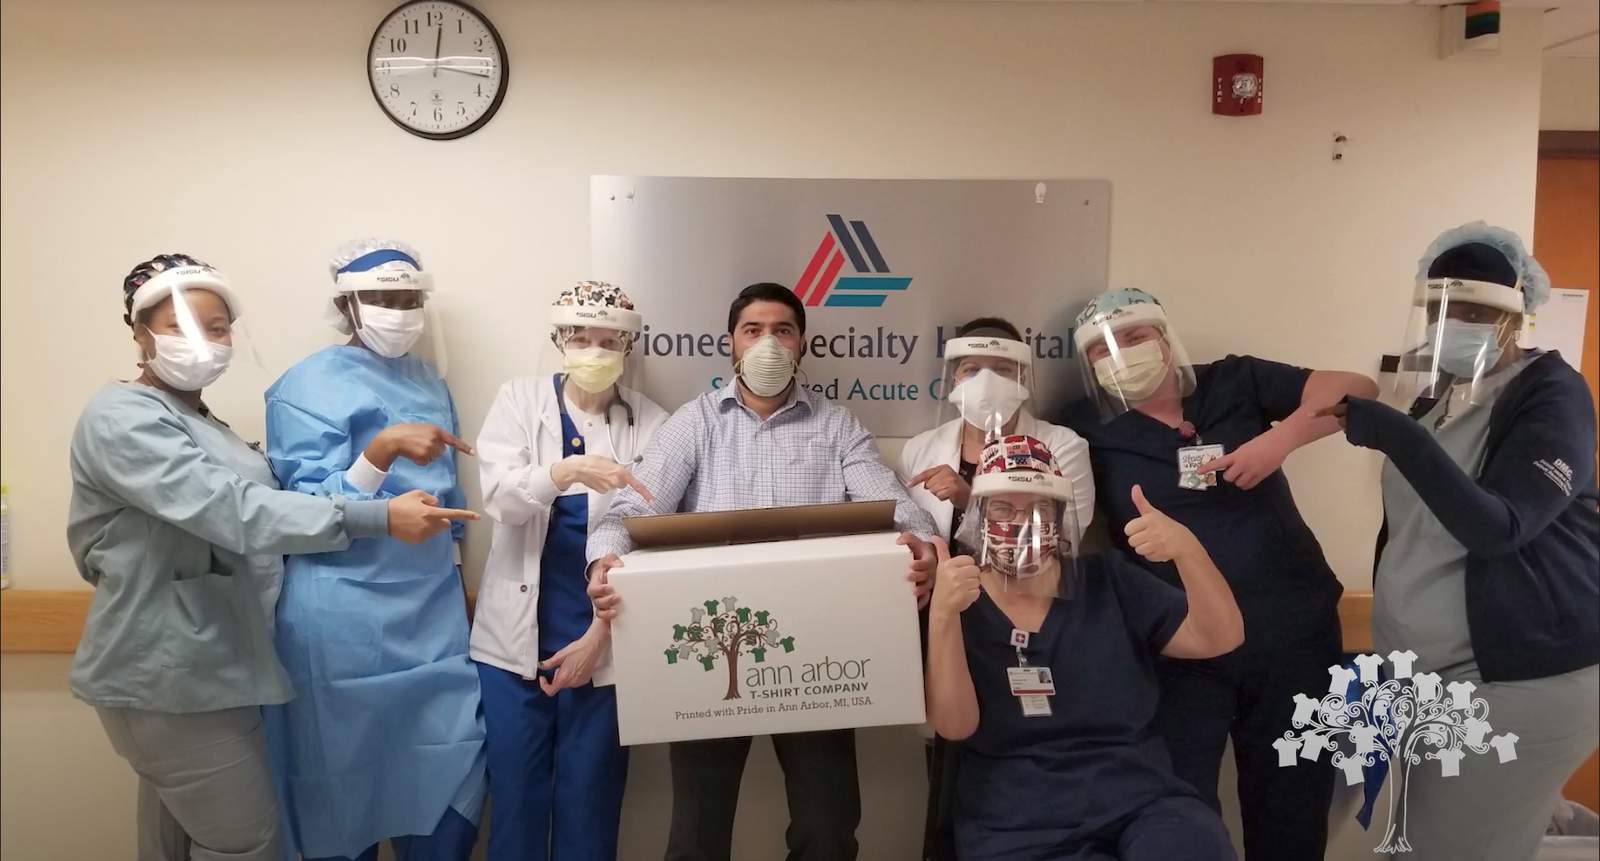 Ann Arbor T-shirt Company makes 25,000 face shields during pandemic